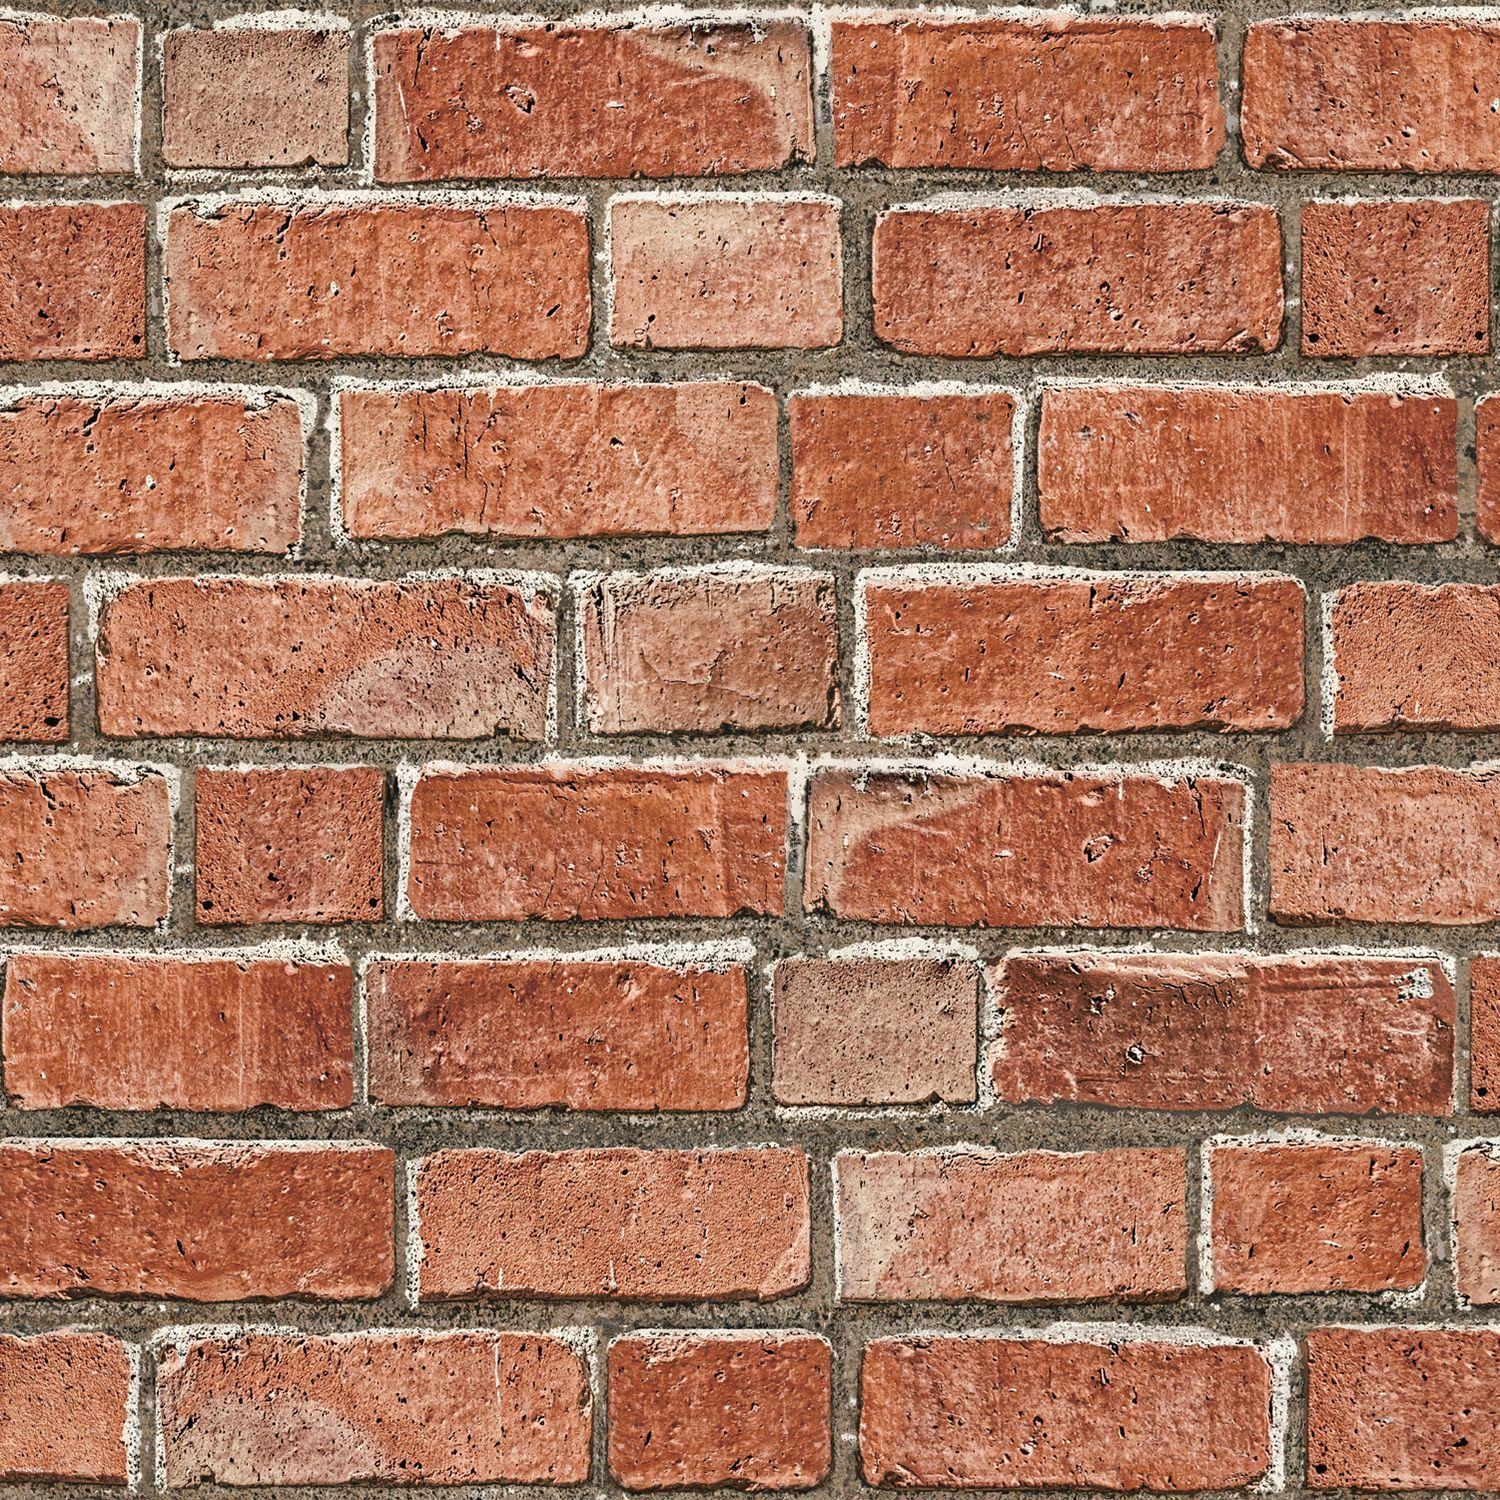 Brick 4k ultra hd 16:10 wallpapers hd, desktop backgrounds 3840x2400,  images and pictures